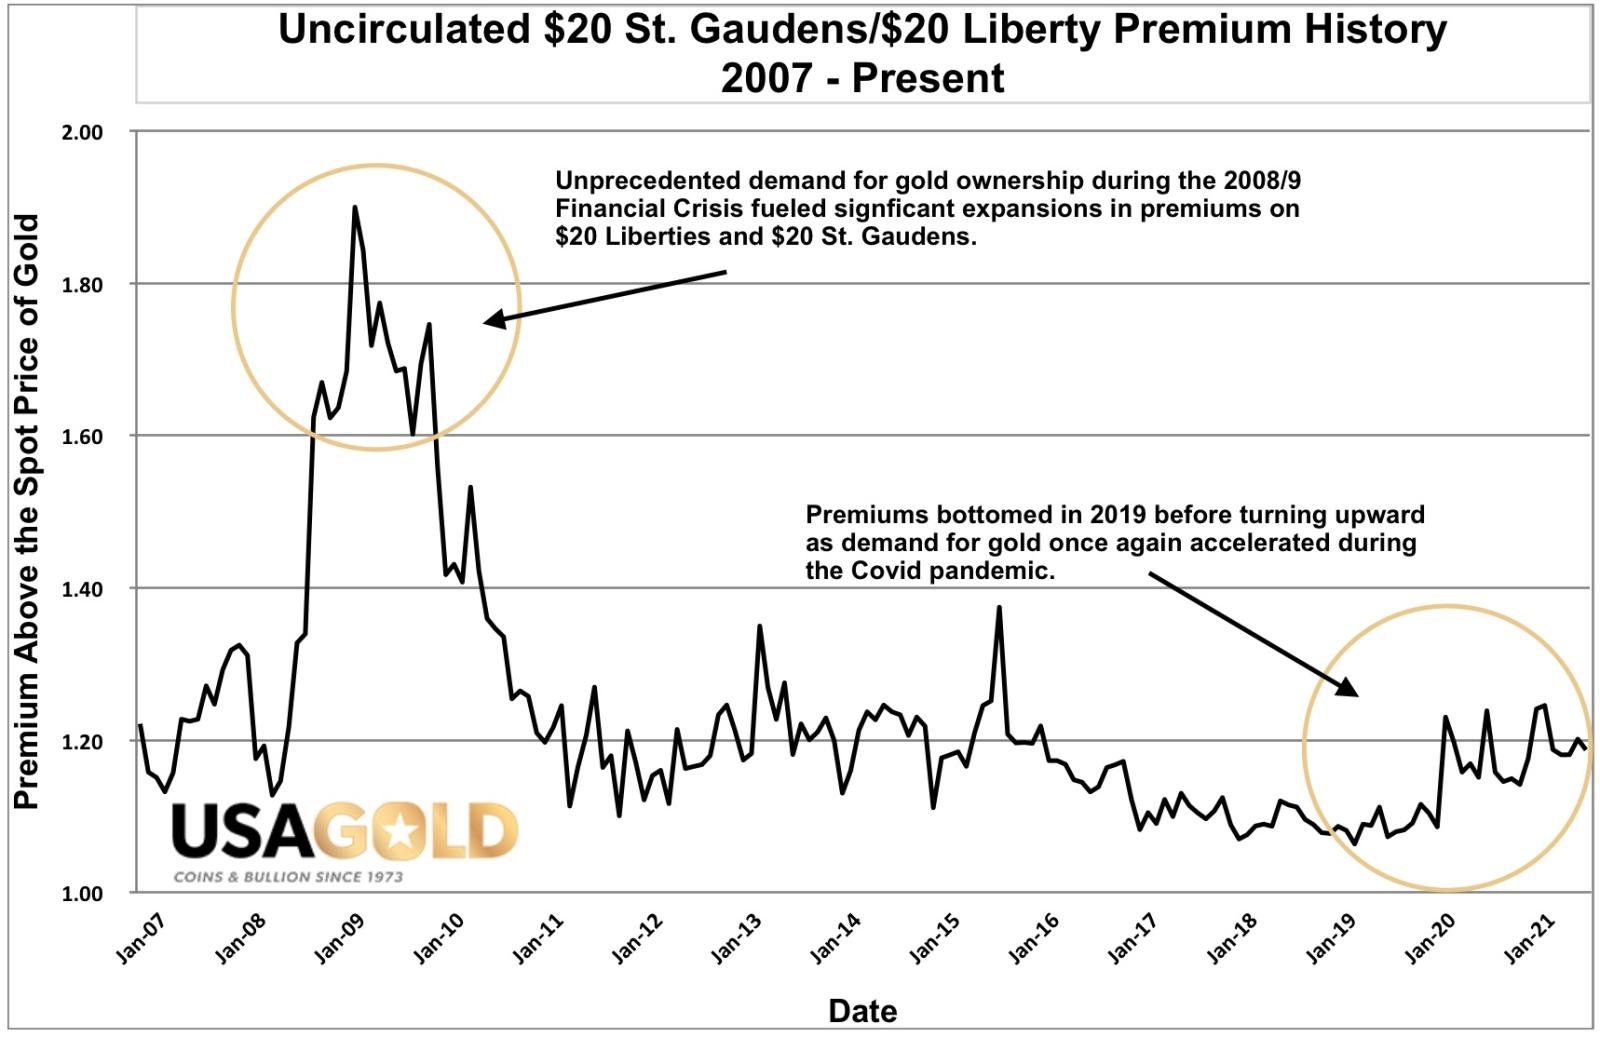 Graph of the premium history for Uncirculated $20 Liberties and St. Gaudens over a fifteen year period.